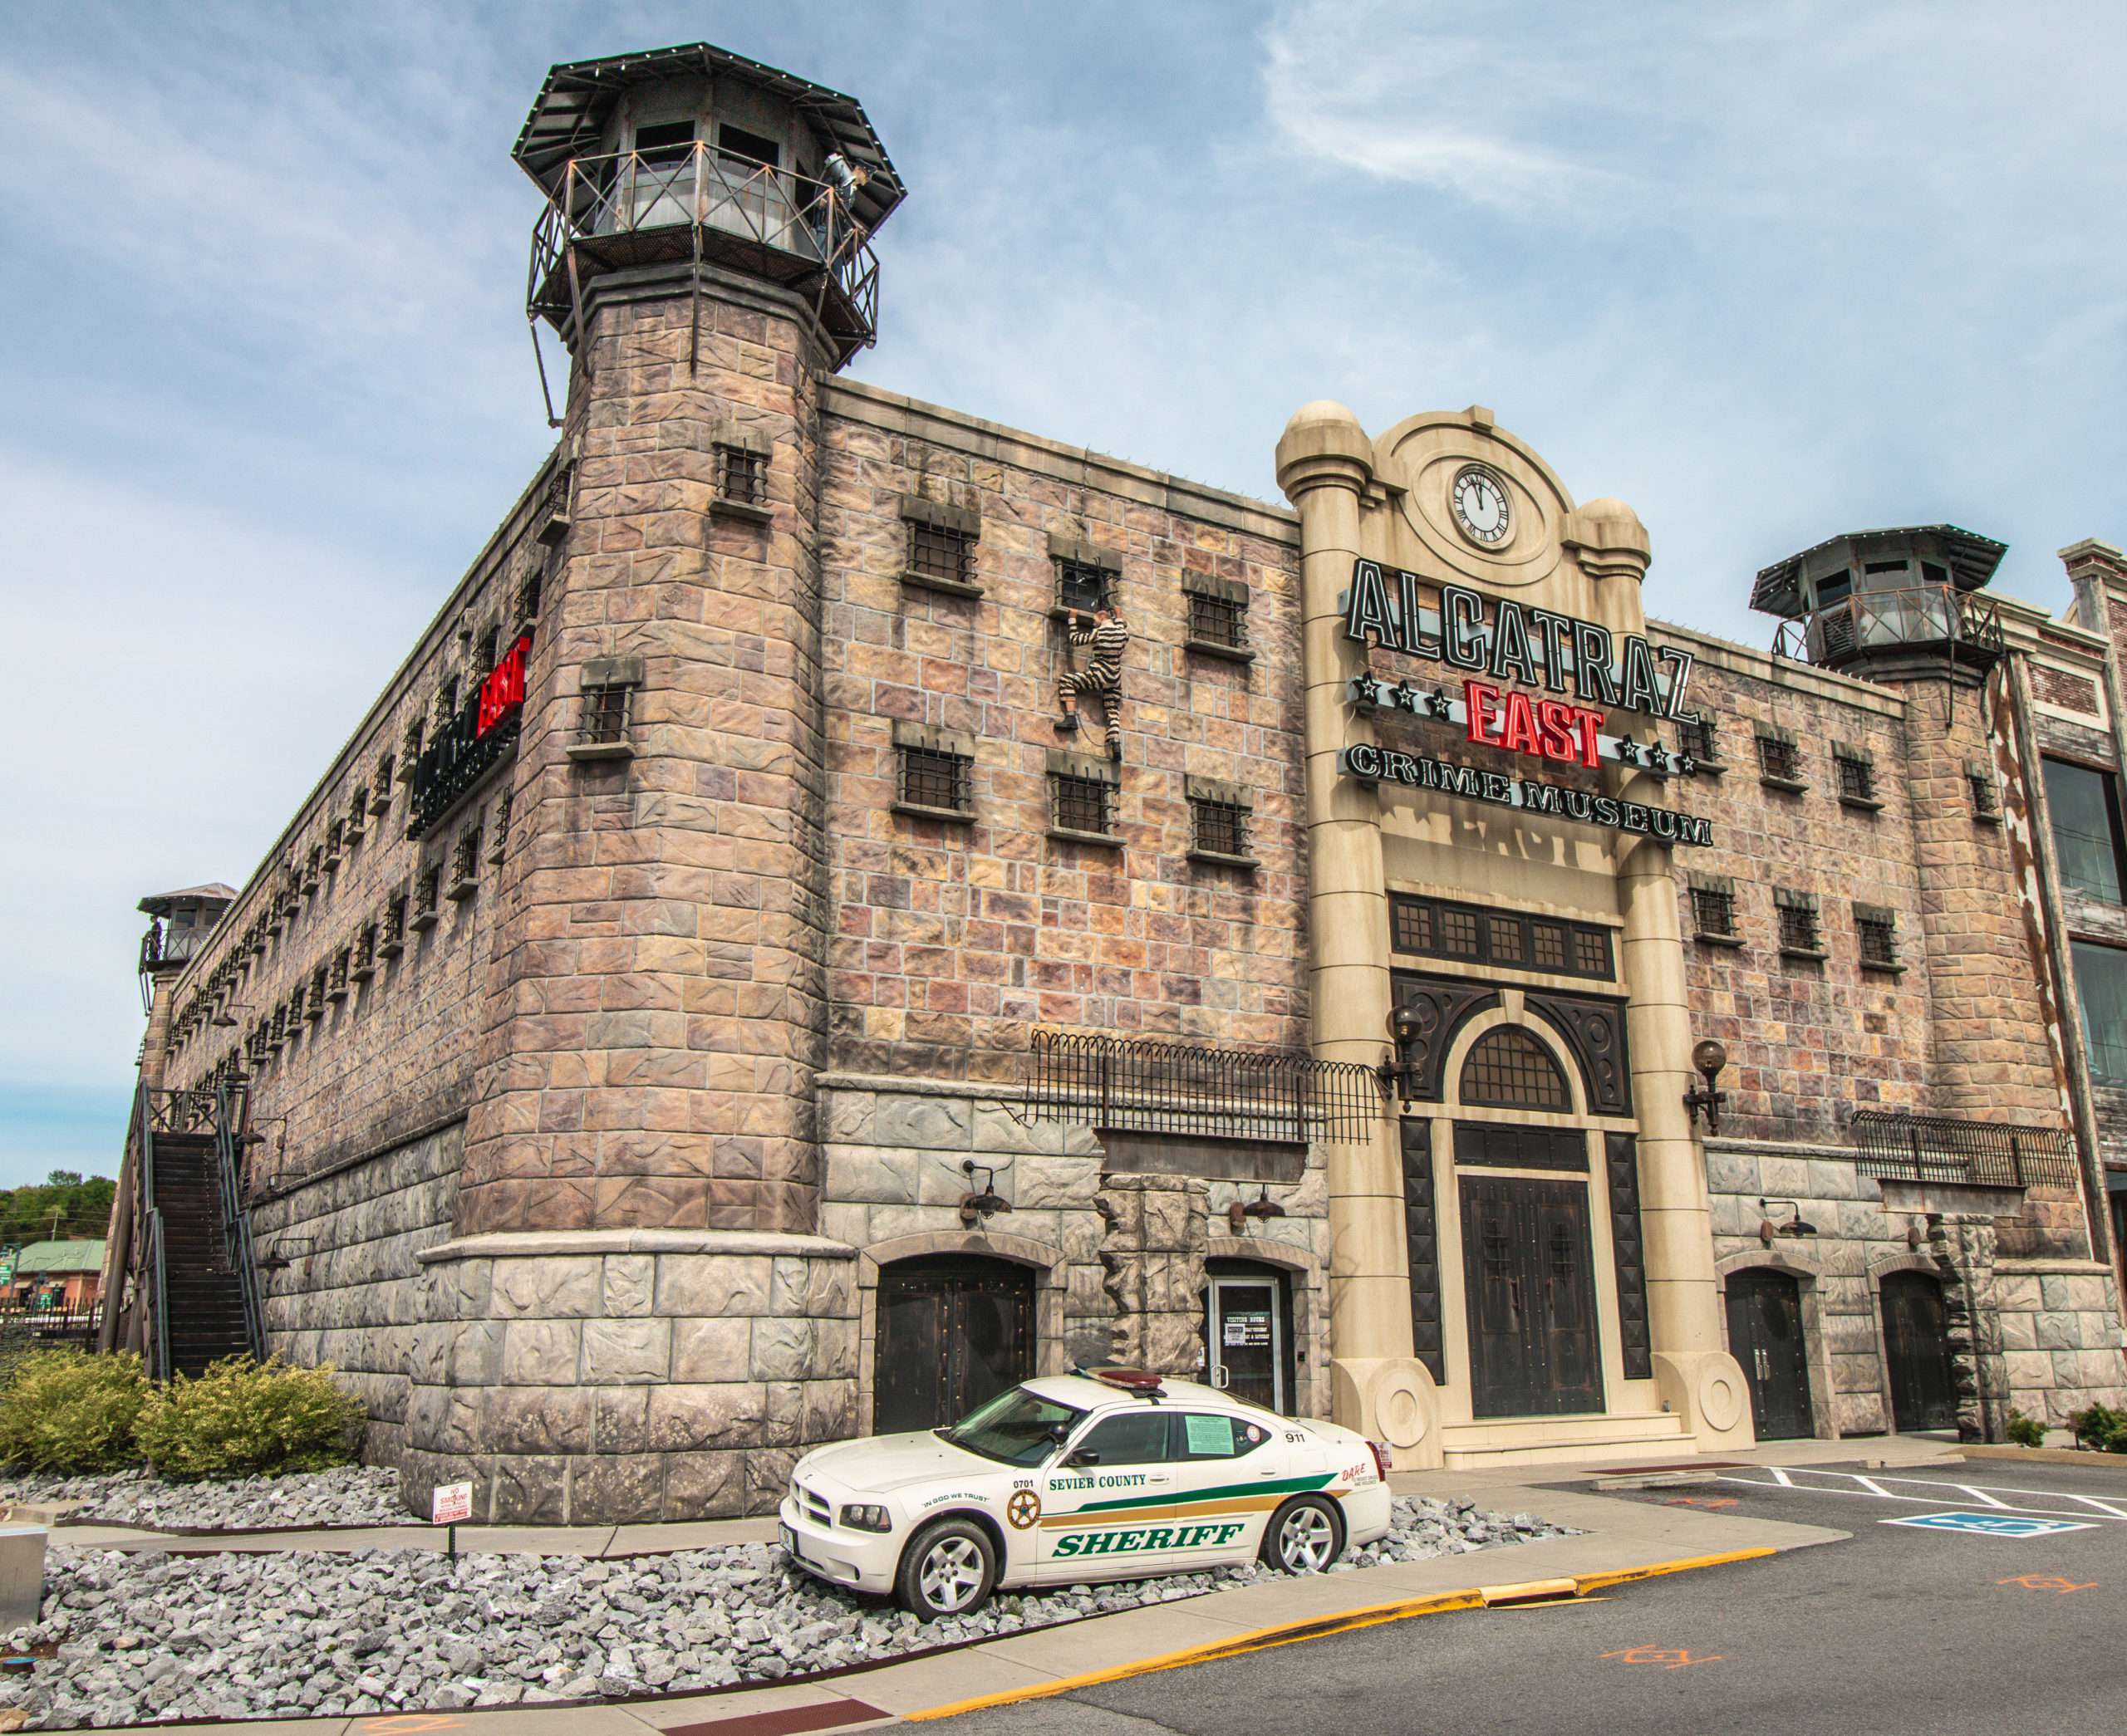 Alcatraz East Crime Museum Announces Reopening after COVID